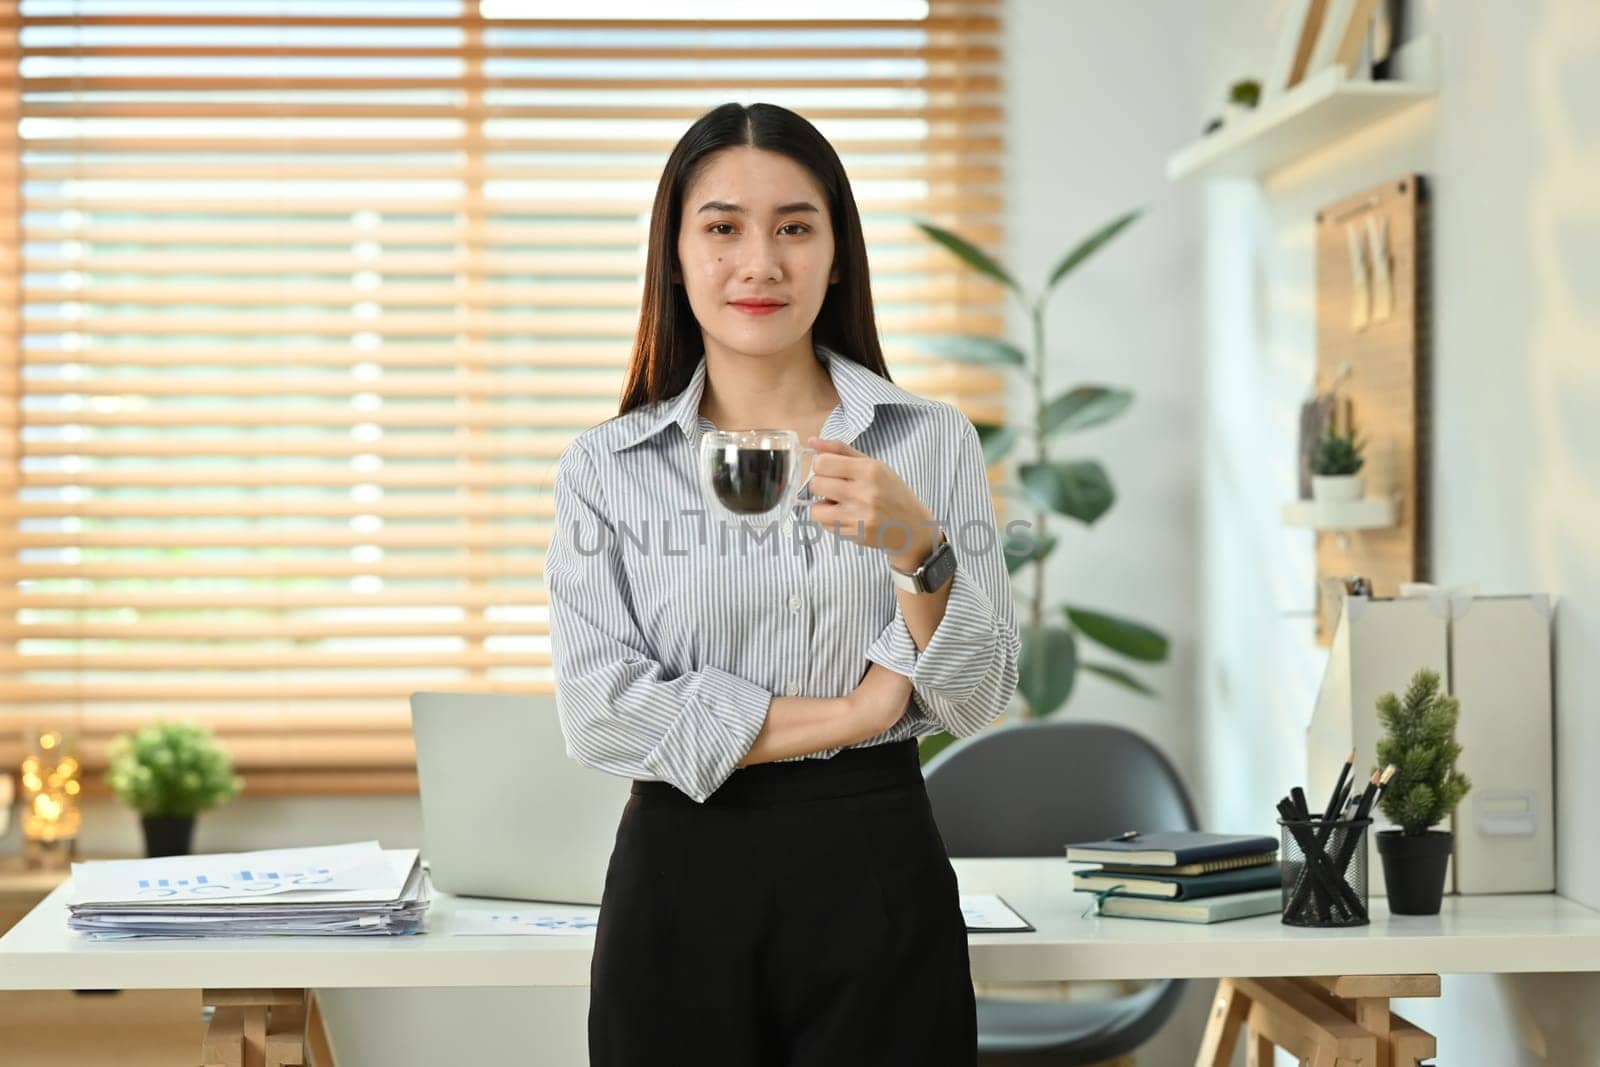 Portrait of millennial female entrepreneur holding cup of coffee standing in front of her desk and smiling at camera.